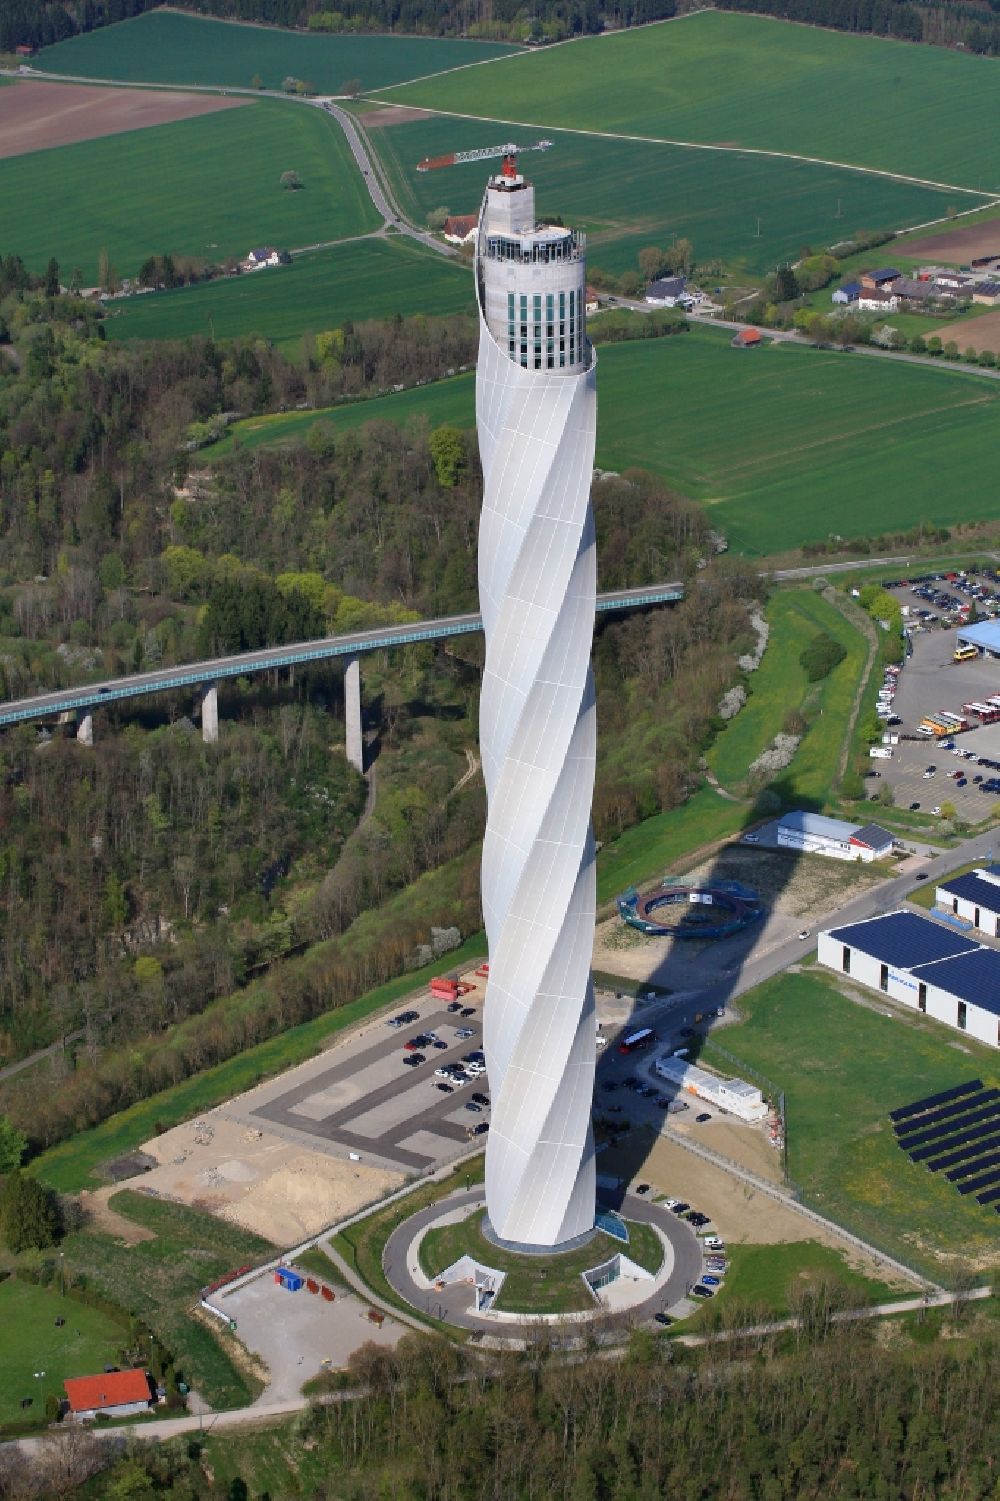 Rottweil from above - Site of the ThyssenKrupp testing tower for Speed elevators in Rottweil in Baden - Wuerttemberg